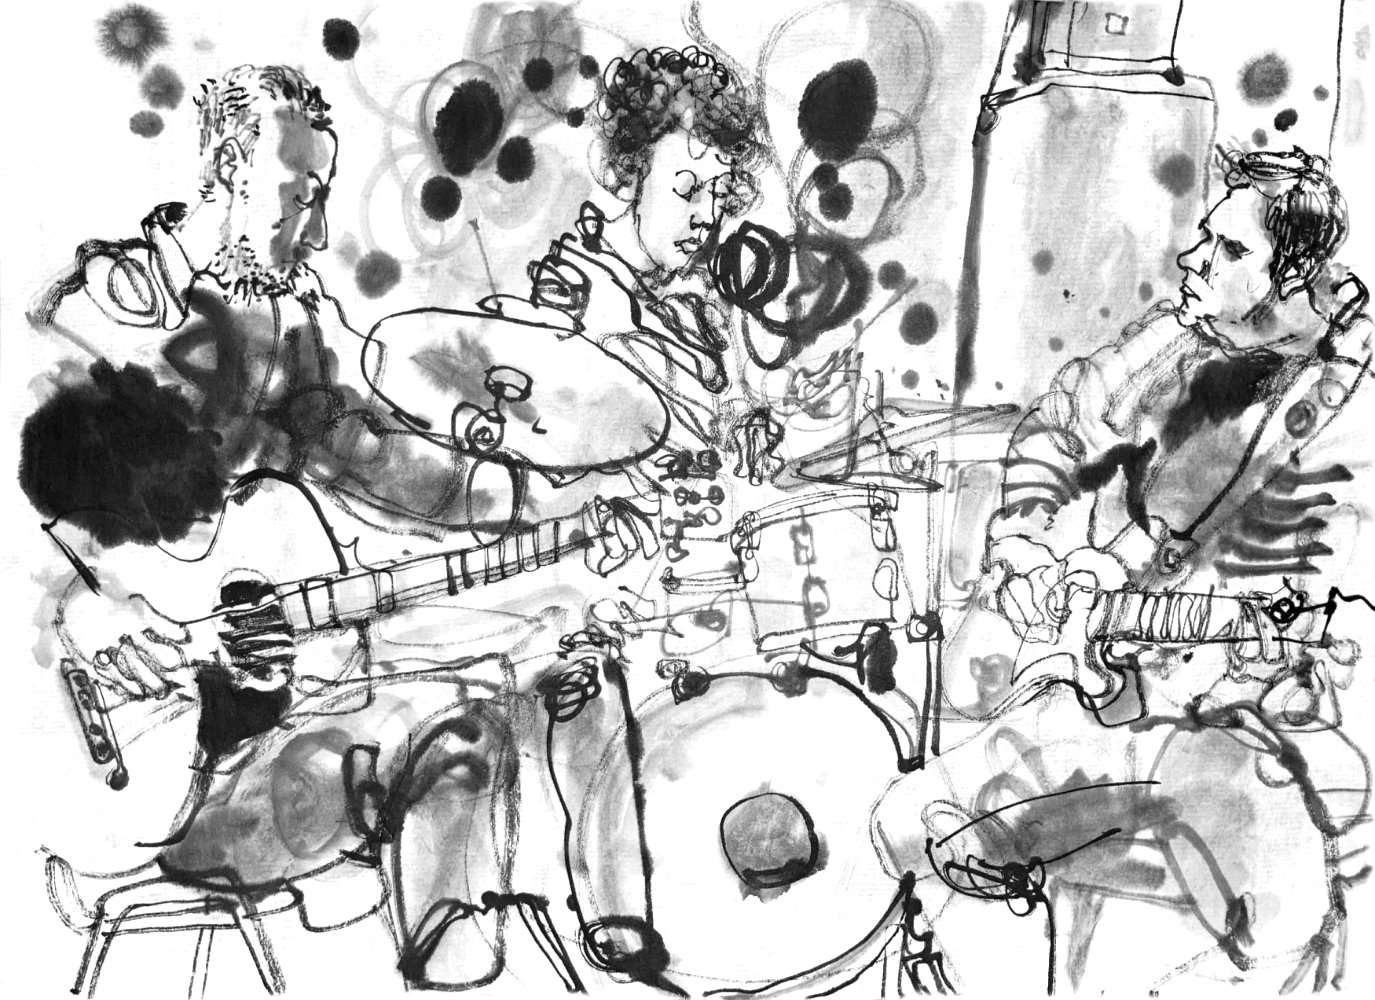 Ink drawing of three musicians, a man playing acoustic bass guitar, a woman on drums and another man on guitar